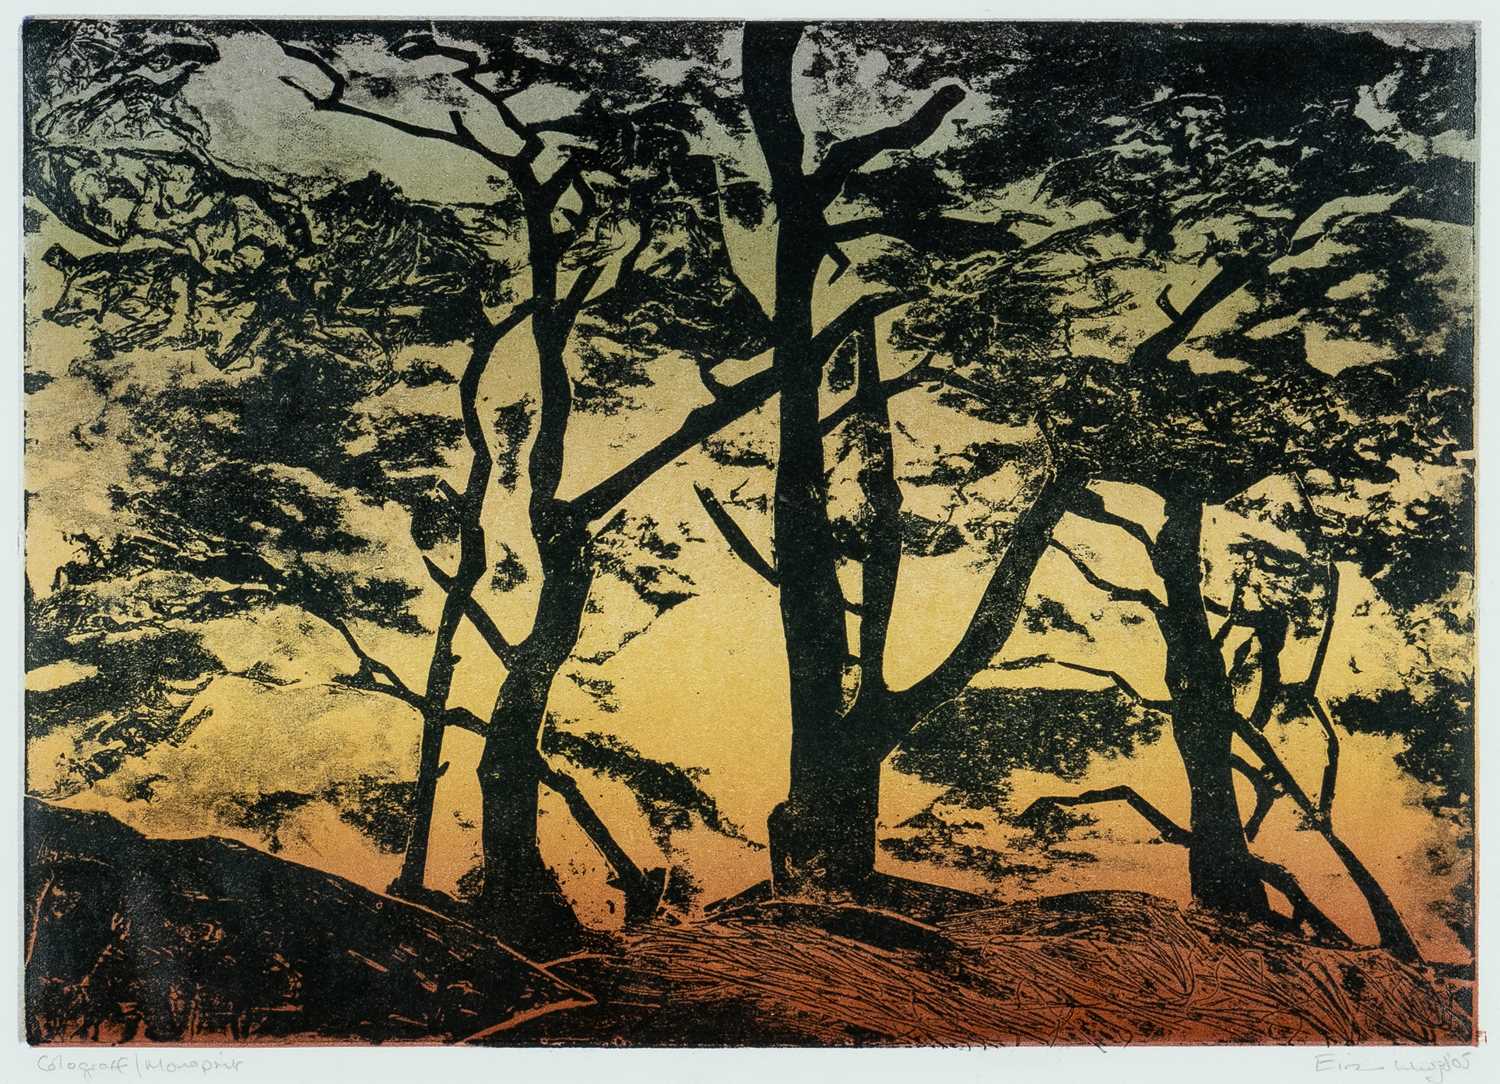 ‡ EIRIAN LLWYD (Welsh 1951-2014) colograff/monoprint - a pair, woodland scene at sunset together - Image 2 of 5